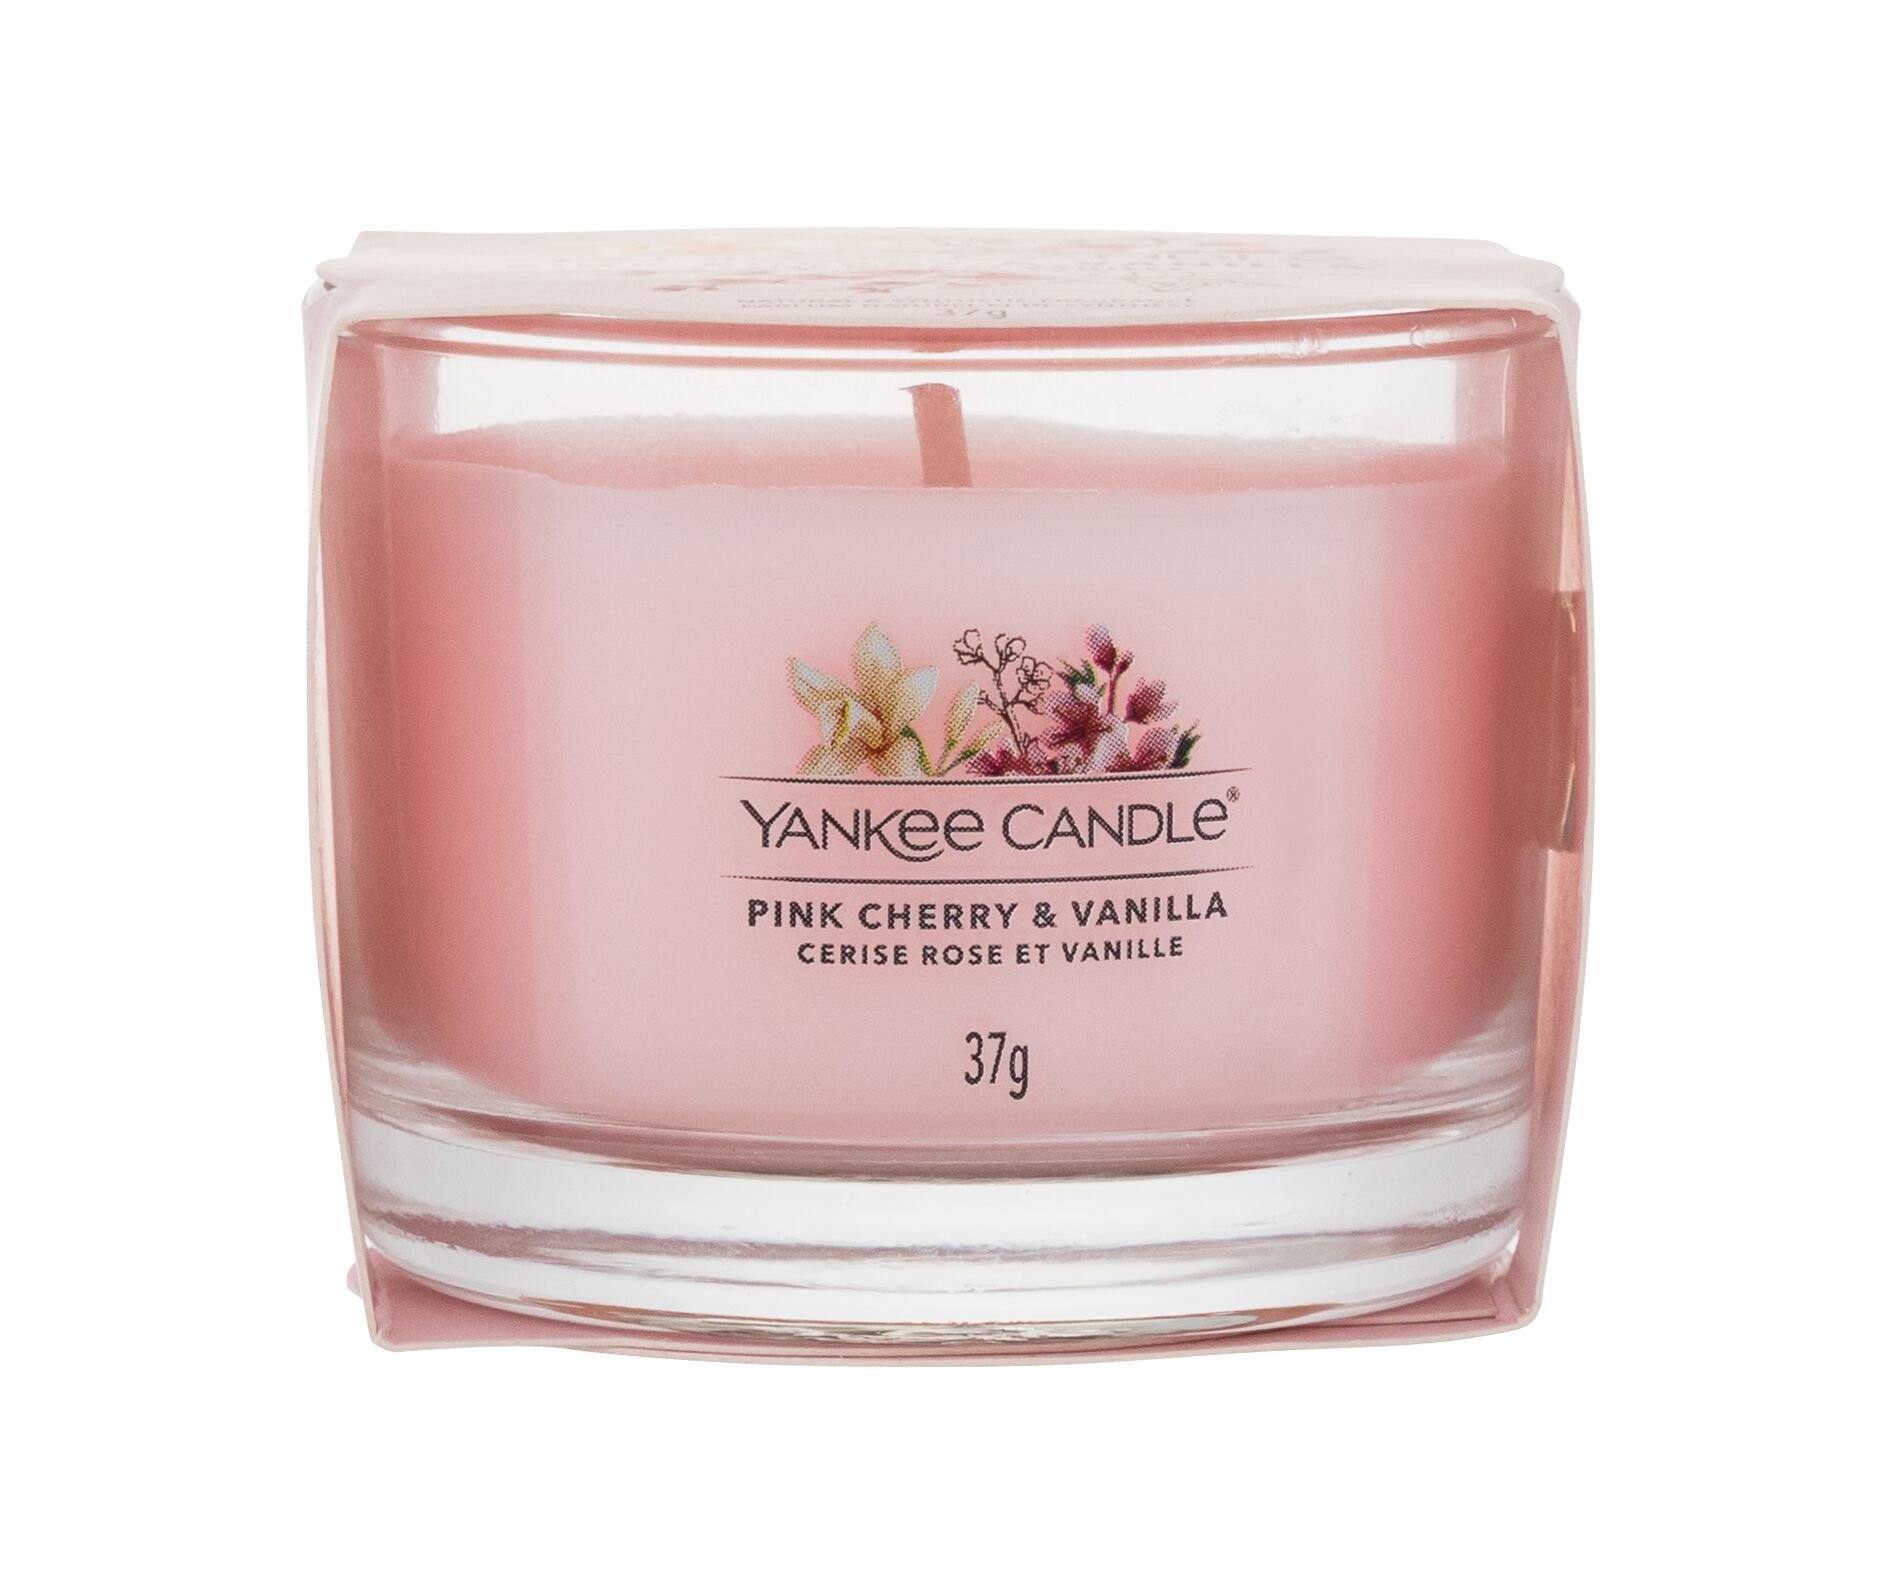 Yankee Candle Pink Cherry & Vanilla 37g Kvepalai Unisex Scented Candle